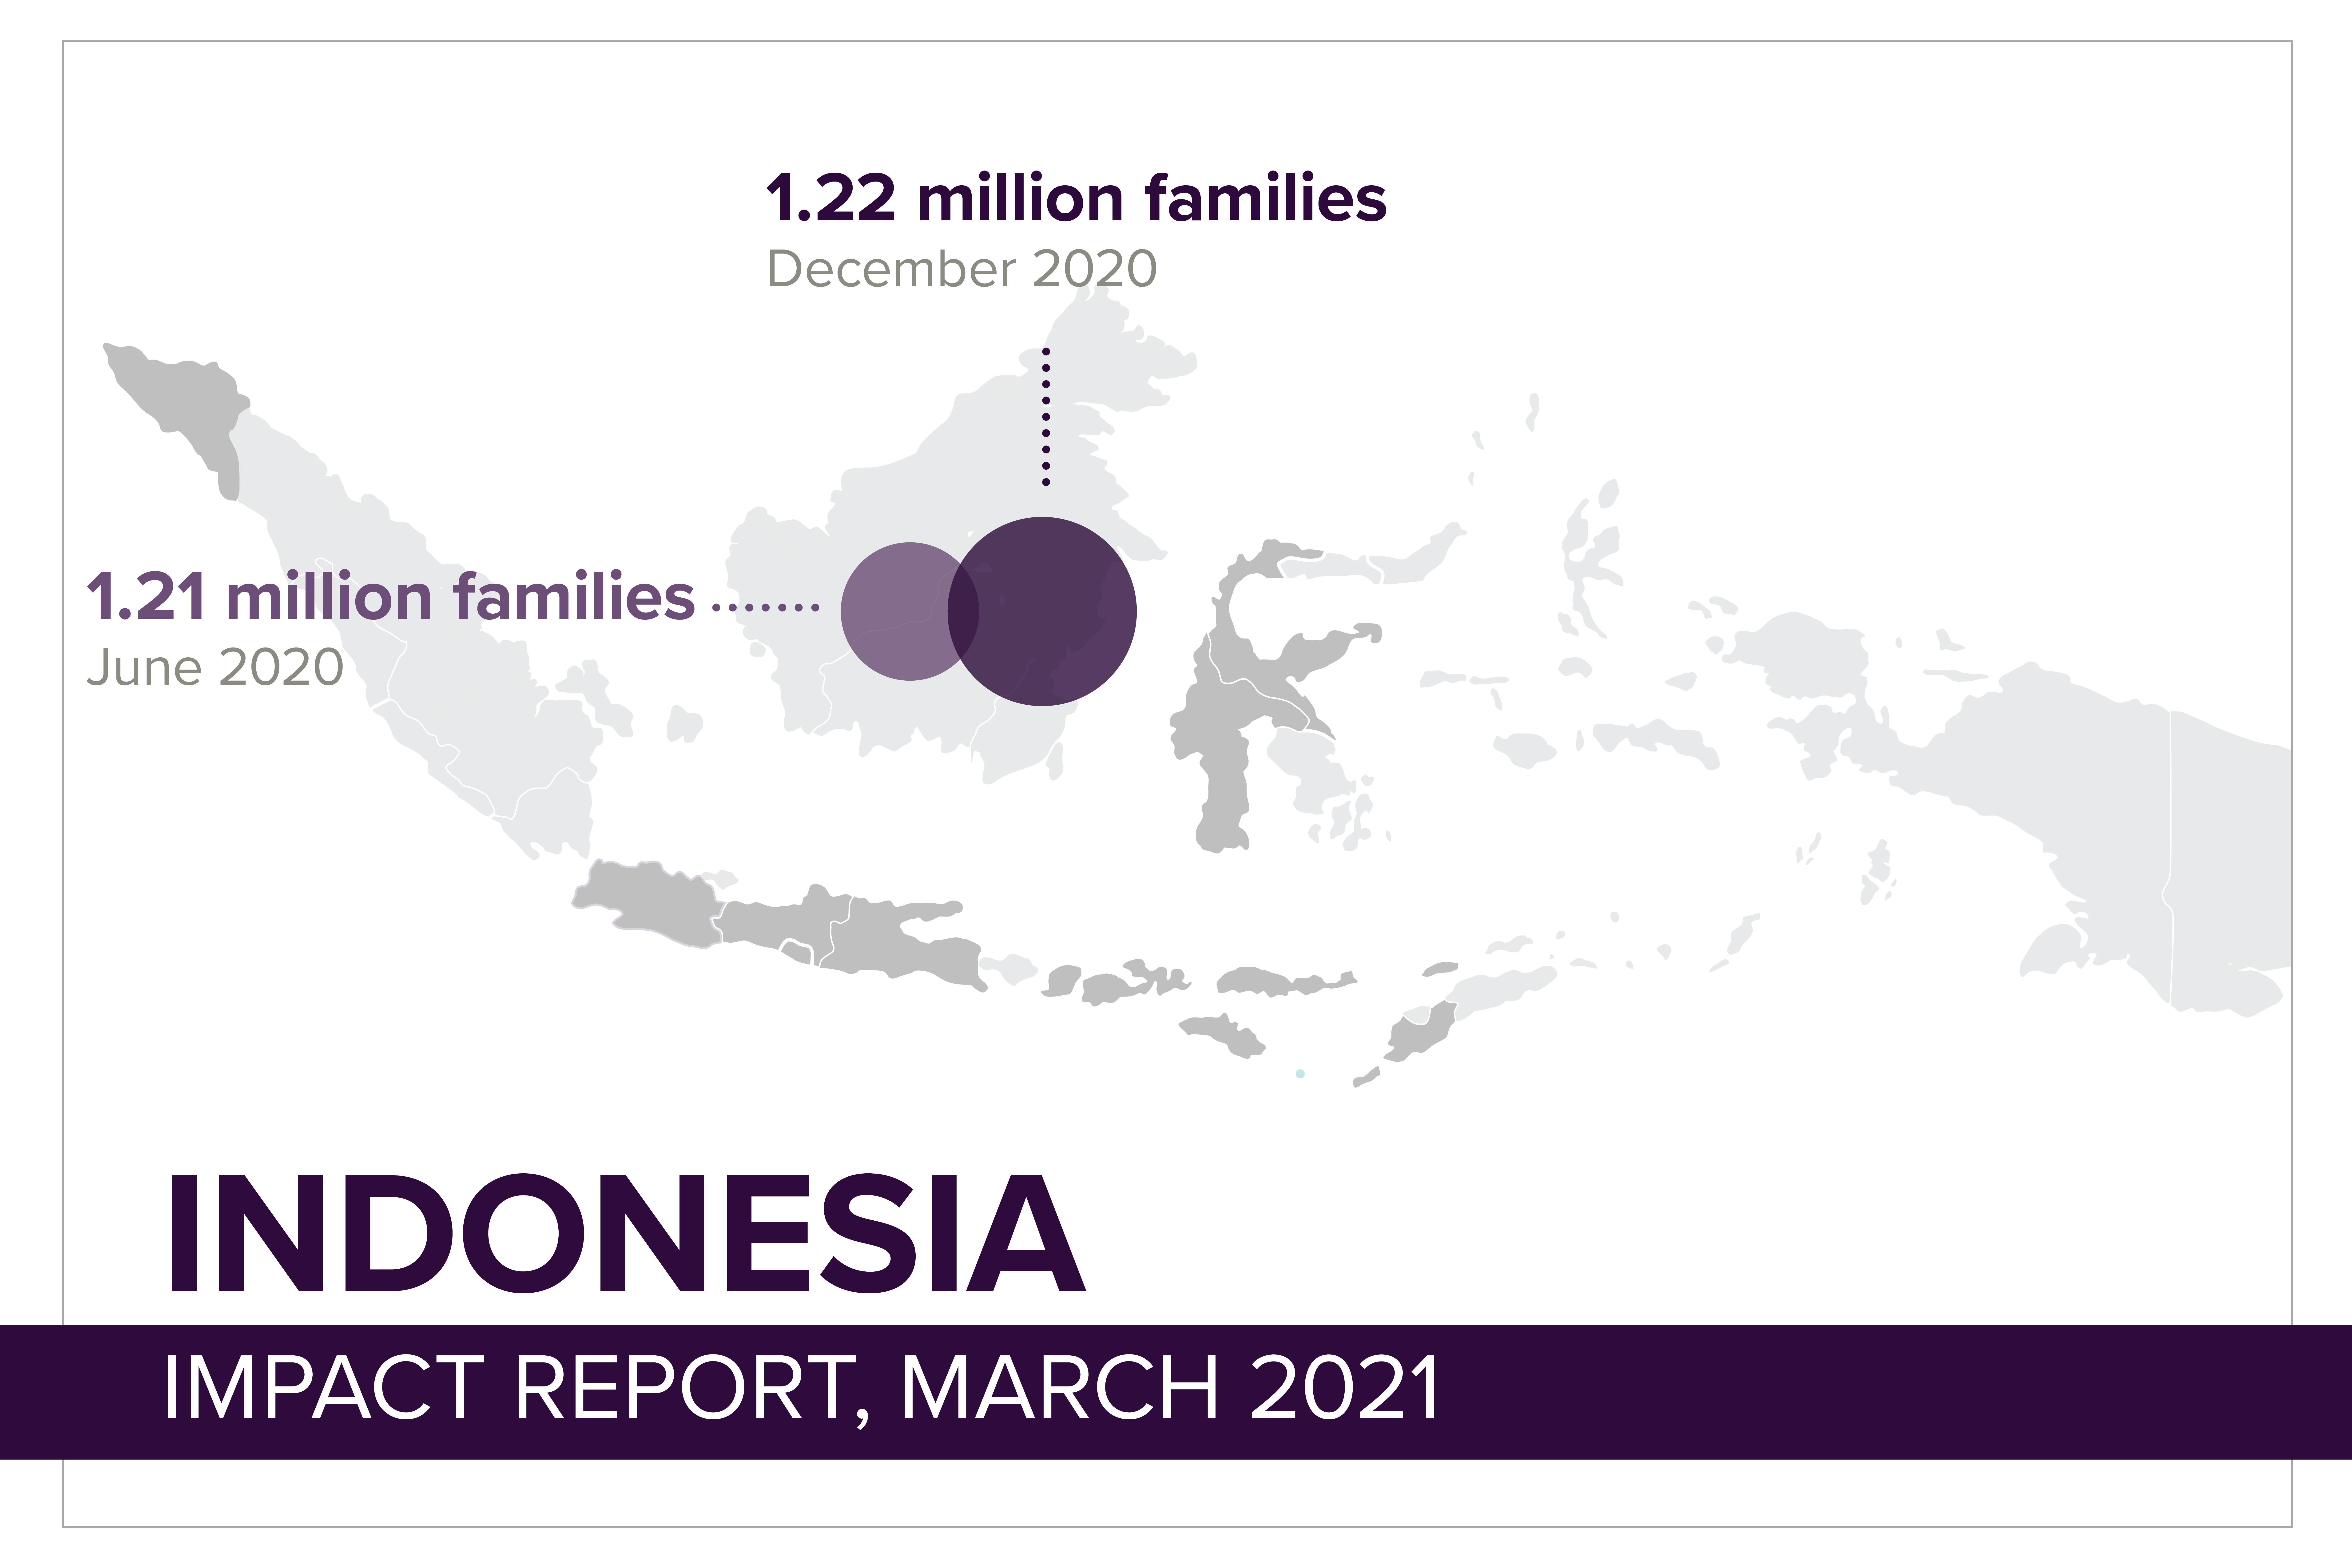 Impact map in Indonesia